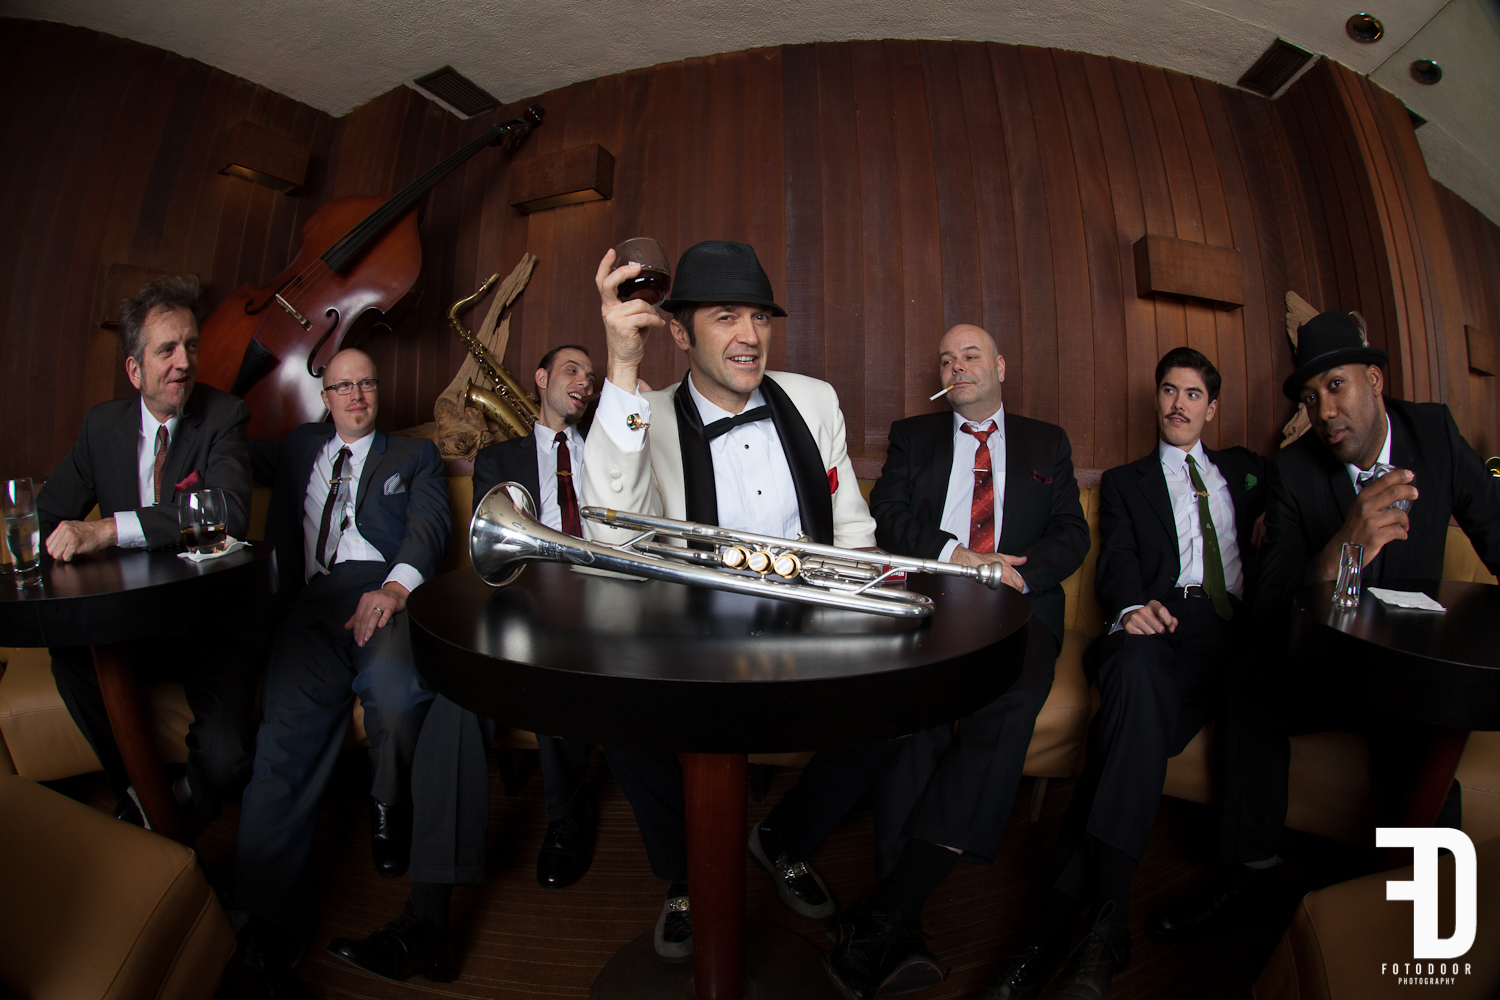 Cherry Poppin' Daddies Performing at Silverton Casino Hotel on July 5